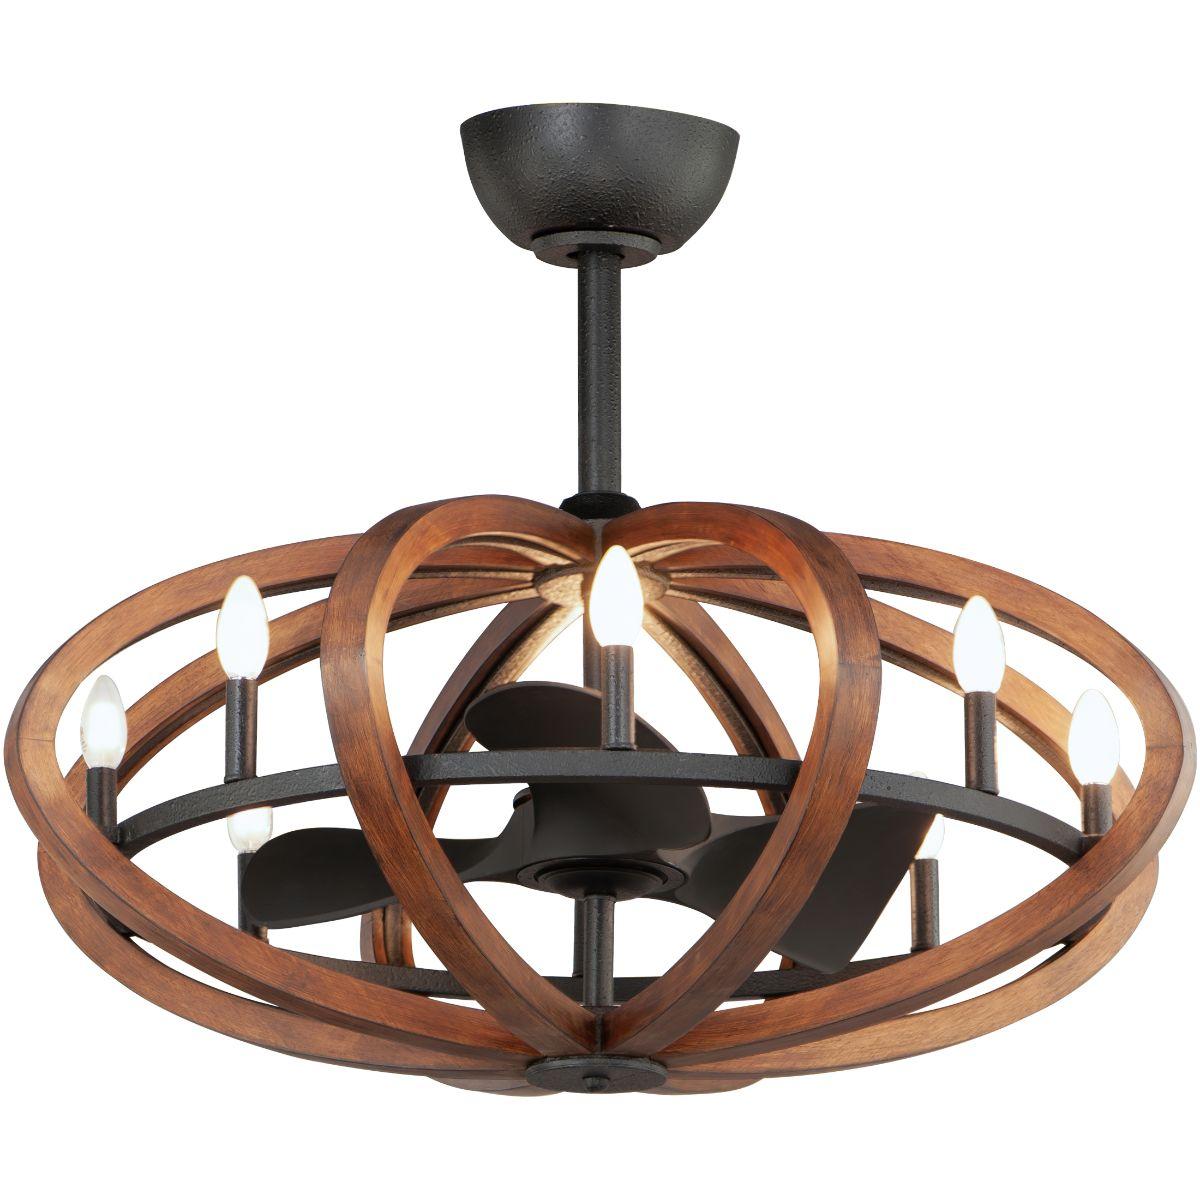 Bodega Bay 36 Inch Antique Pecan/Anthracite Outdoor Smart Fandelier With Light And Remote